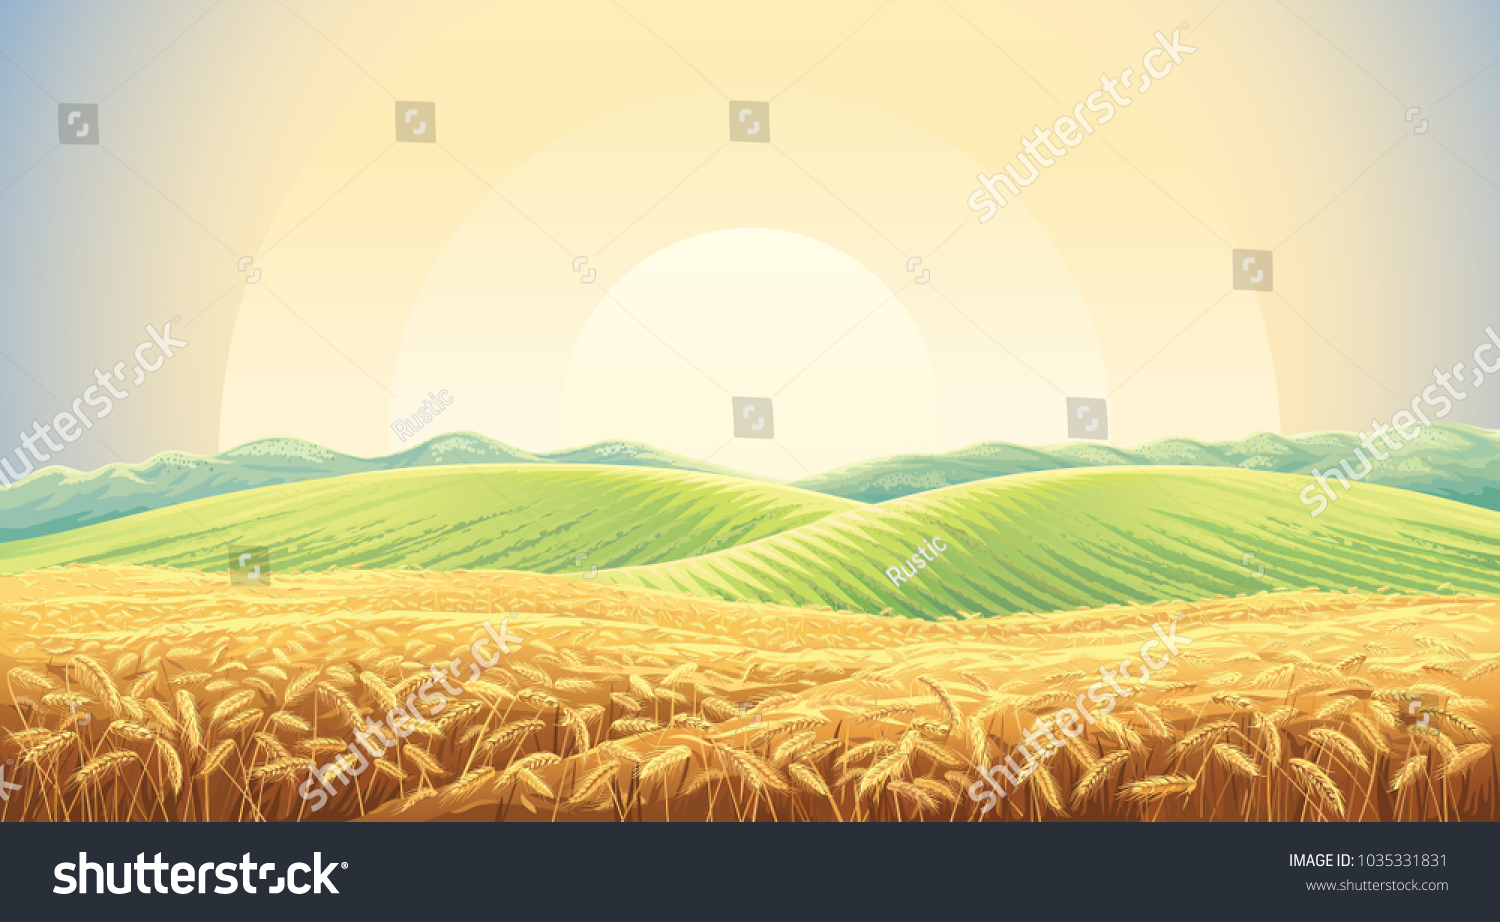 Summer landscape with a field of ripe wheat, and hills and dales in the background #1035331831